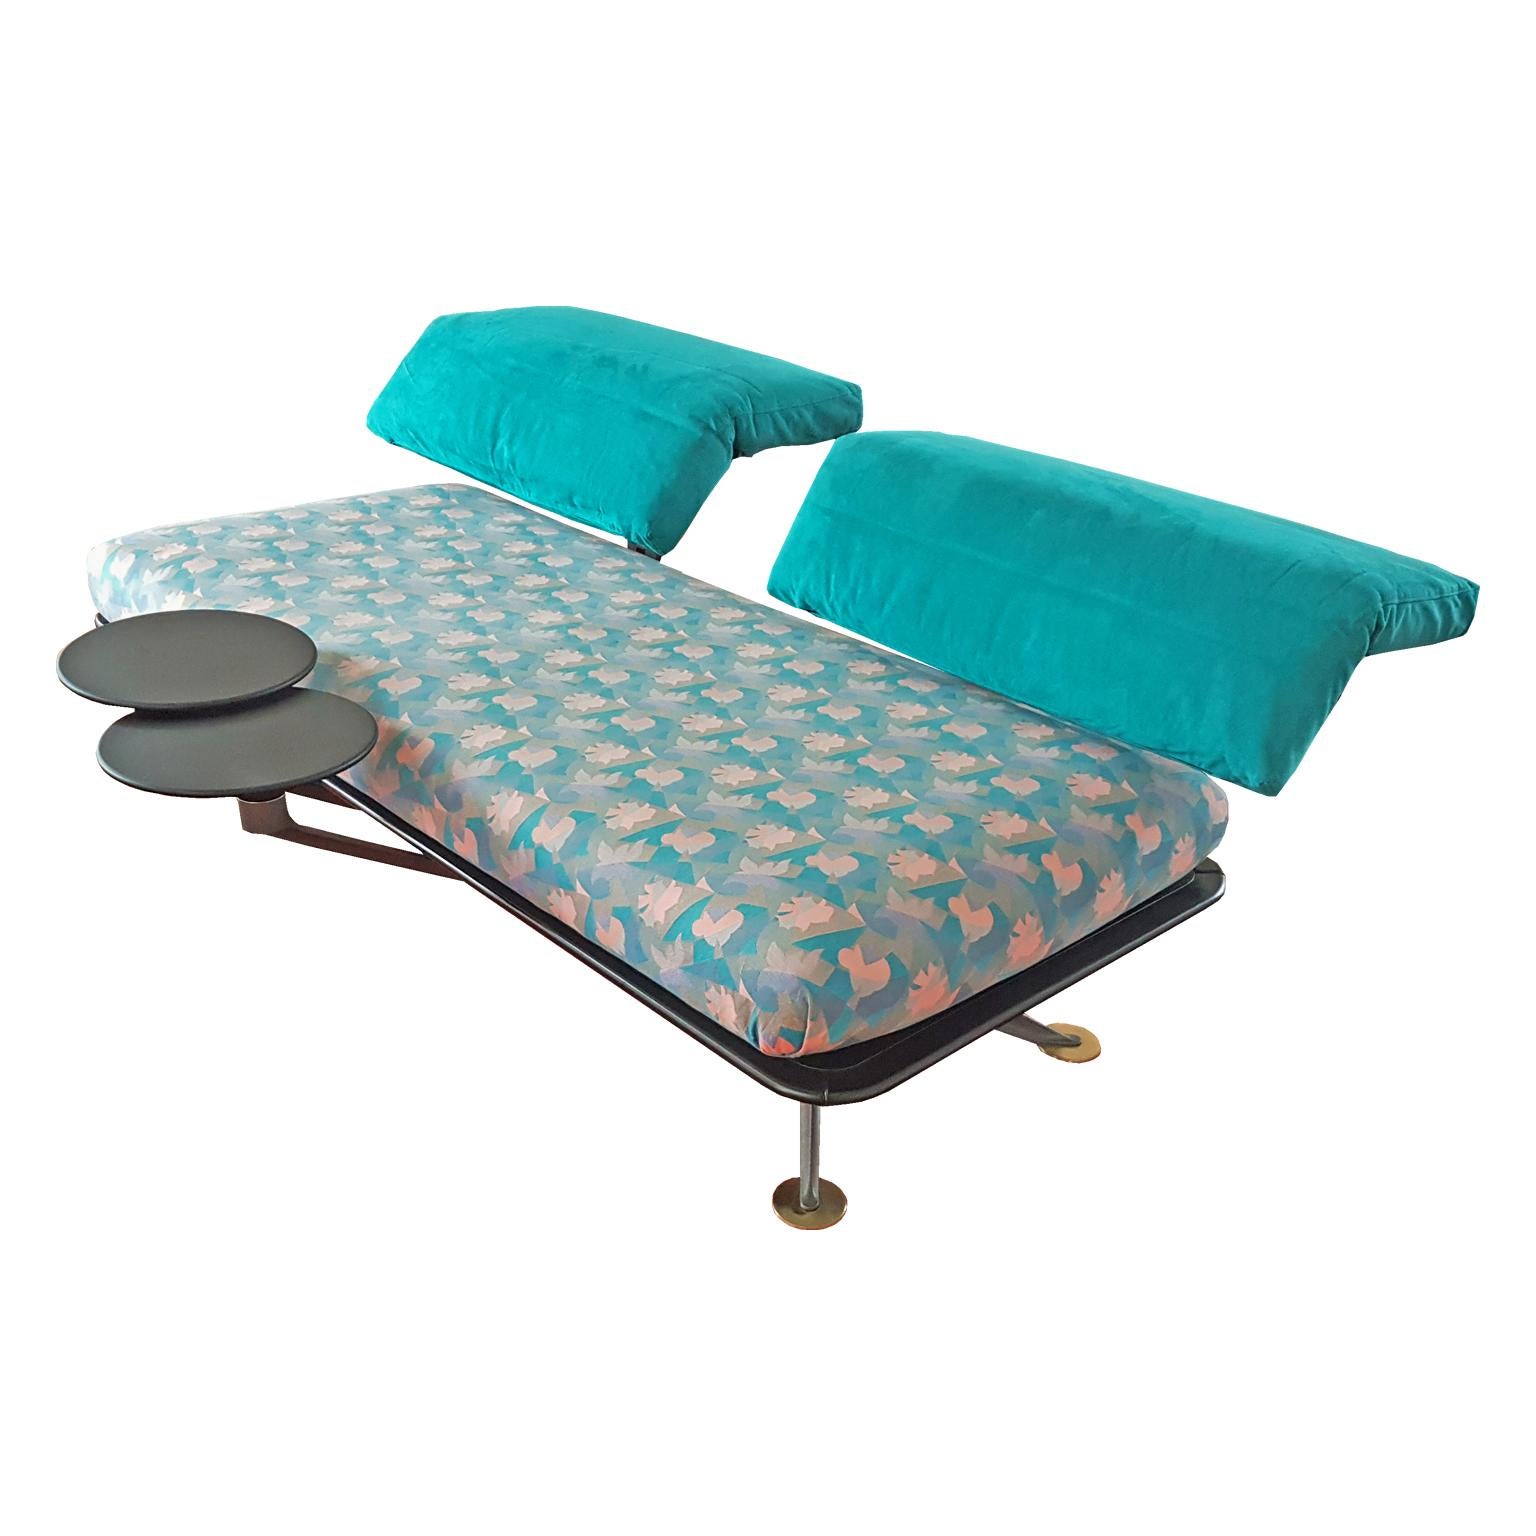 Post-Modern Italian B&B Turquoise and Floreal Fabric Daybed, Sofa with Back Rotation For Sale